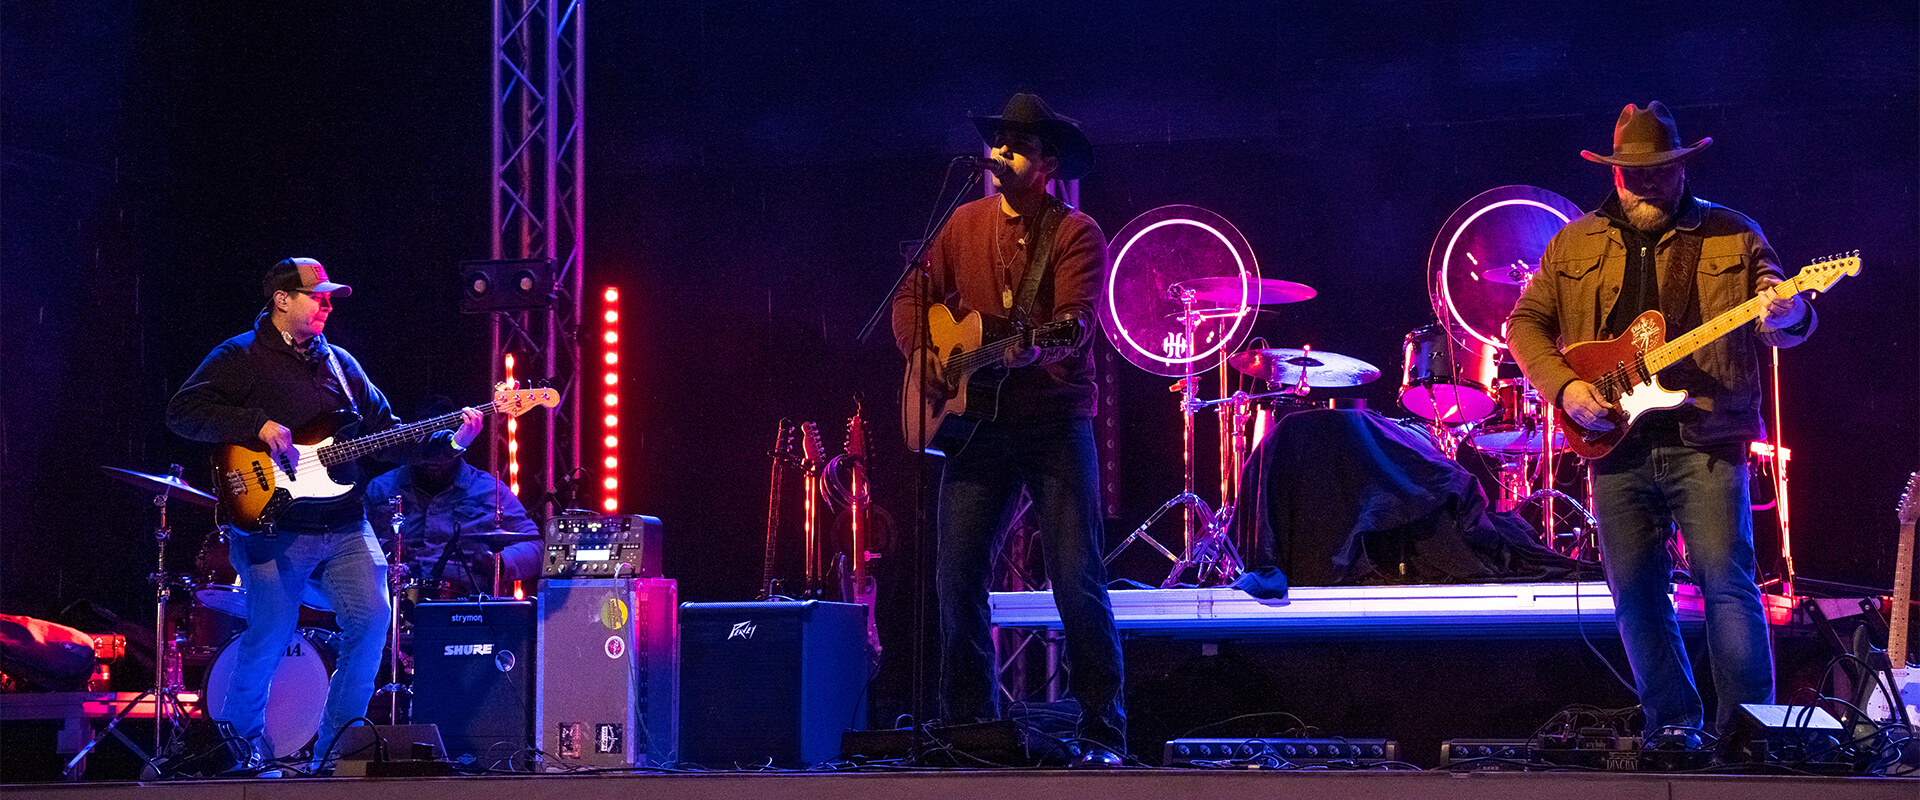 Trey Gonzalez and his band perform onstage.